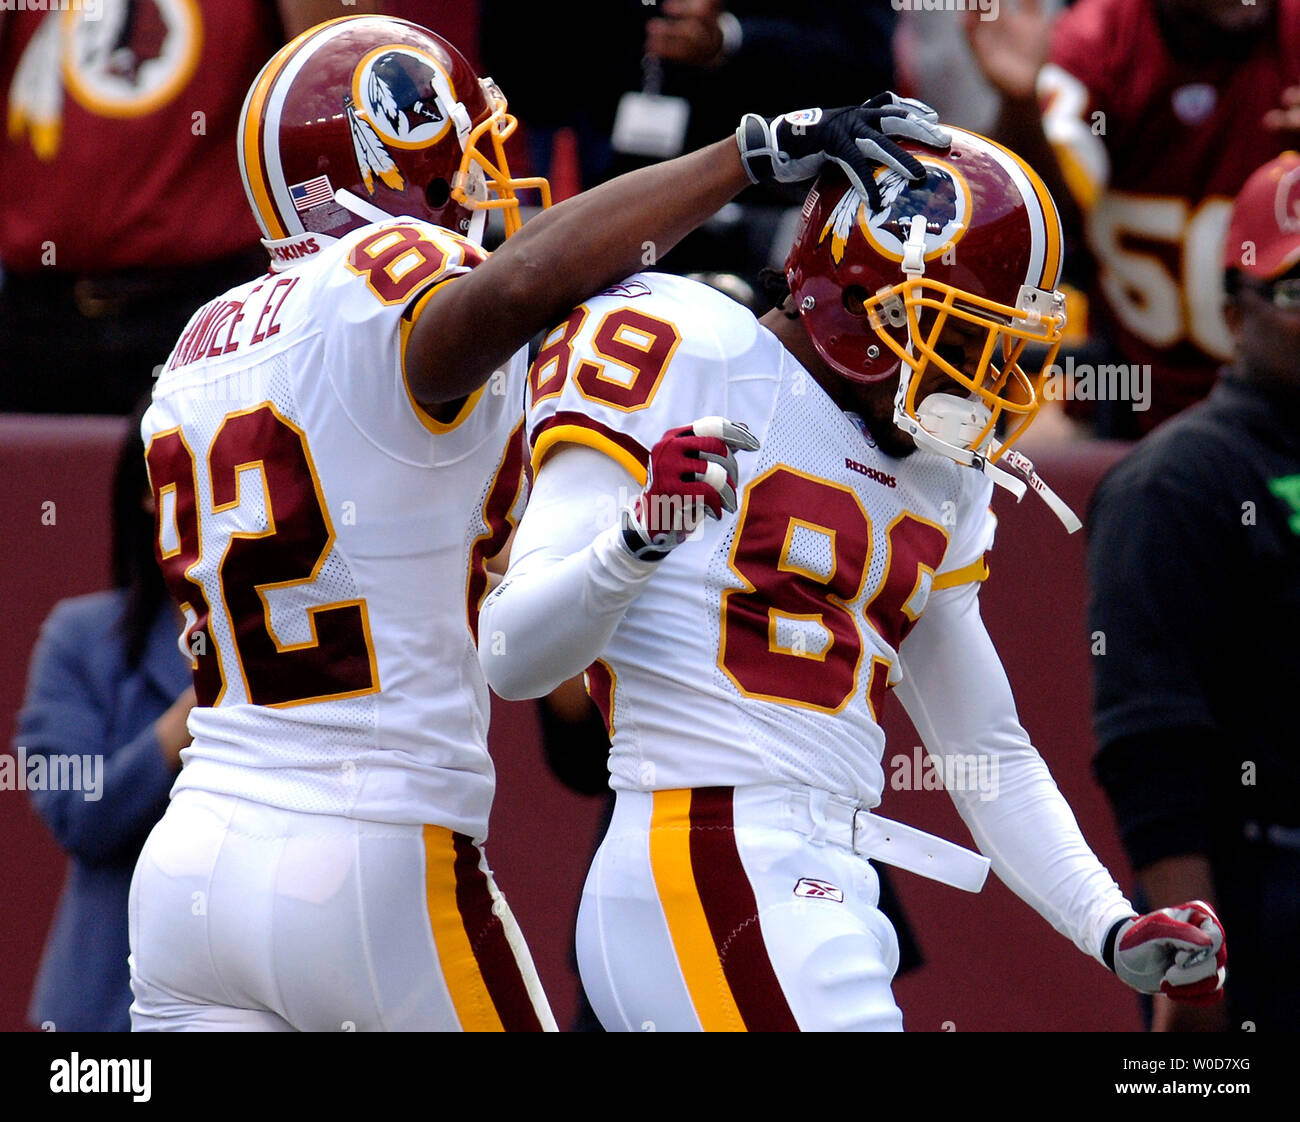 Washington Redskins Santana Moss (89) and Antwaan Randle El (82) celebrates Moss's 15 yard touchdown reception during the first quarter at Fed Ex Field, in Landover, MD on October 1, 2006. (UPI Photo/Kevin Dietsch) Stock Photo